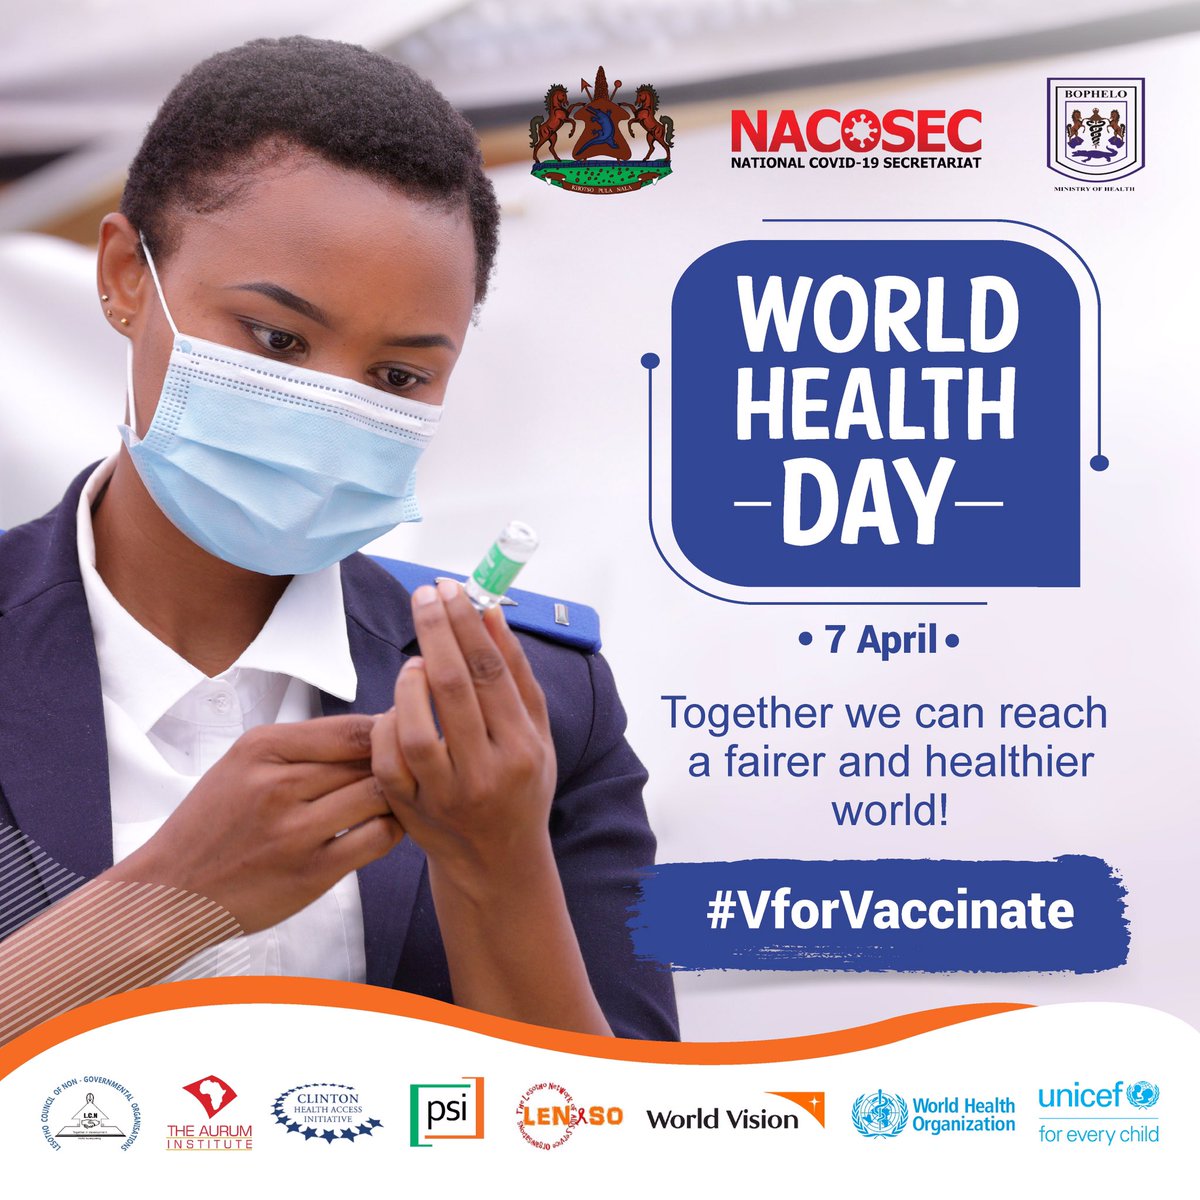 With over 20 000 Health Care Workers in Lesotho Vaccinated 💉against COVID-19 , this World Health Day, we celebrate achievements towards a fairer and healthier world🙂
@WHOLesotho @EUinLesotho 

#COVAX #WorldHealthDay #Vaccinated #VforVaccinate
#UnicefLesotho #Lesotho #StaySafe